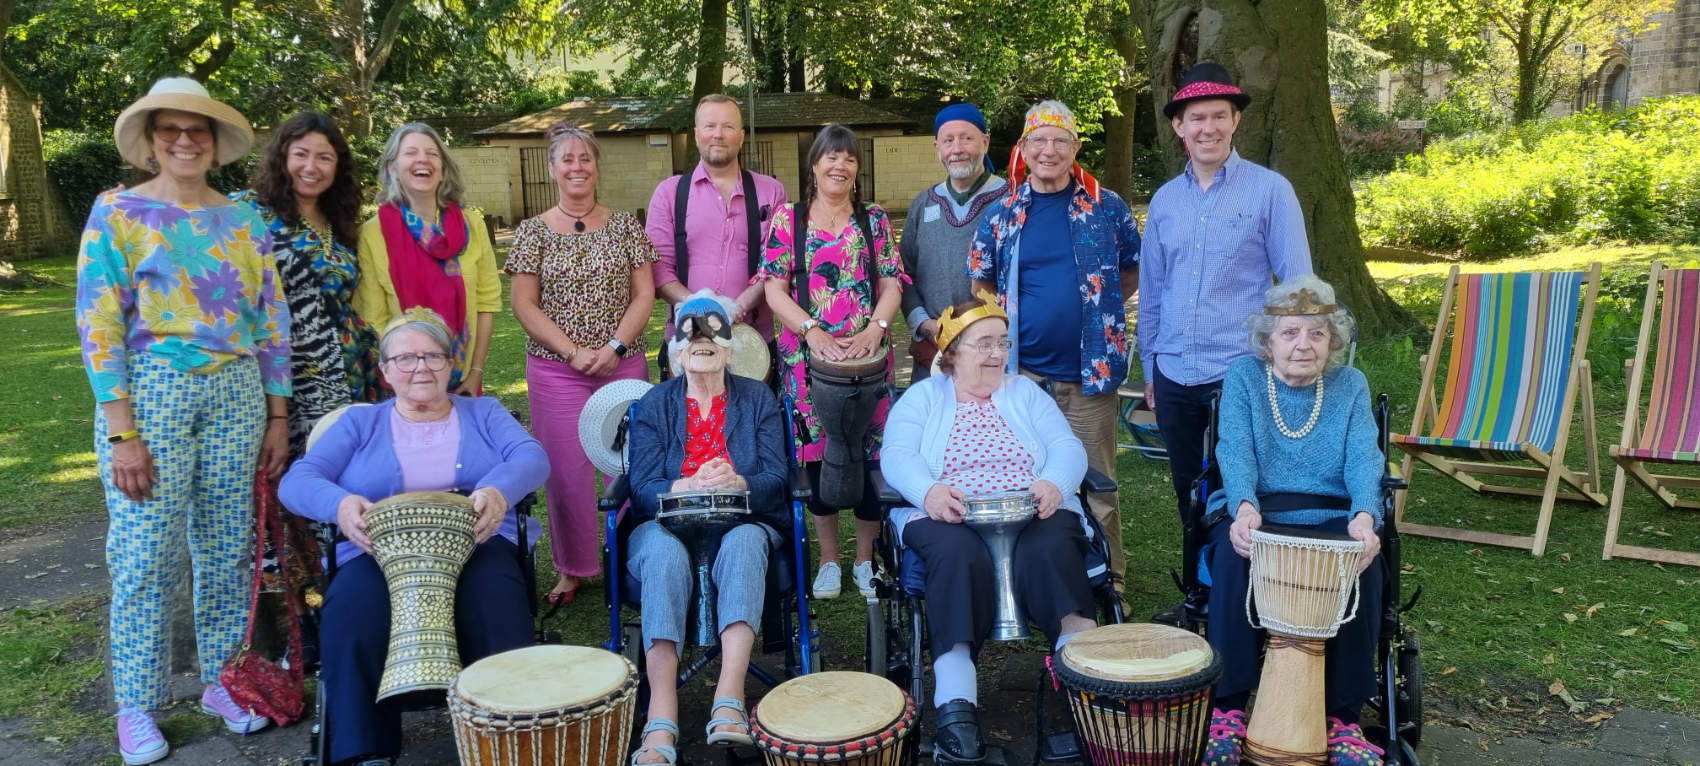 Sycamore Hall Care Home drummers and the Ripon Drumming Circle came together to perform at the Ripon Theatre Festival